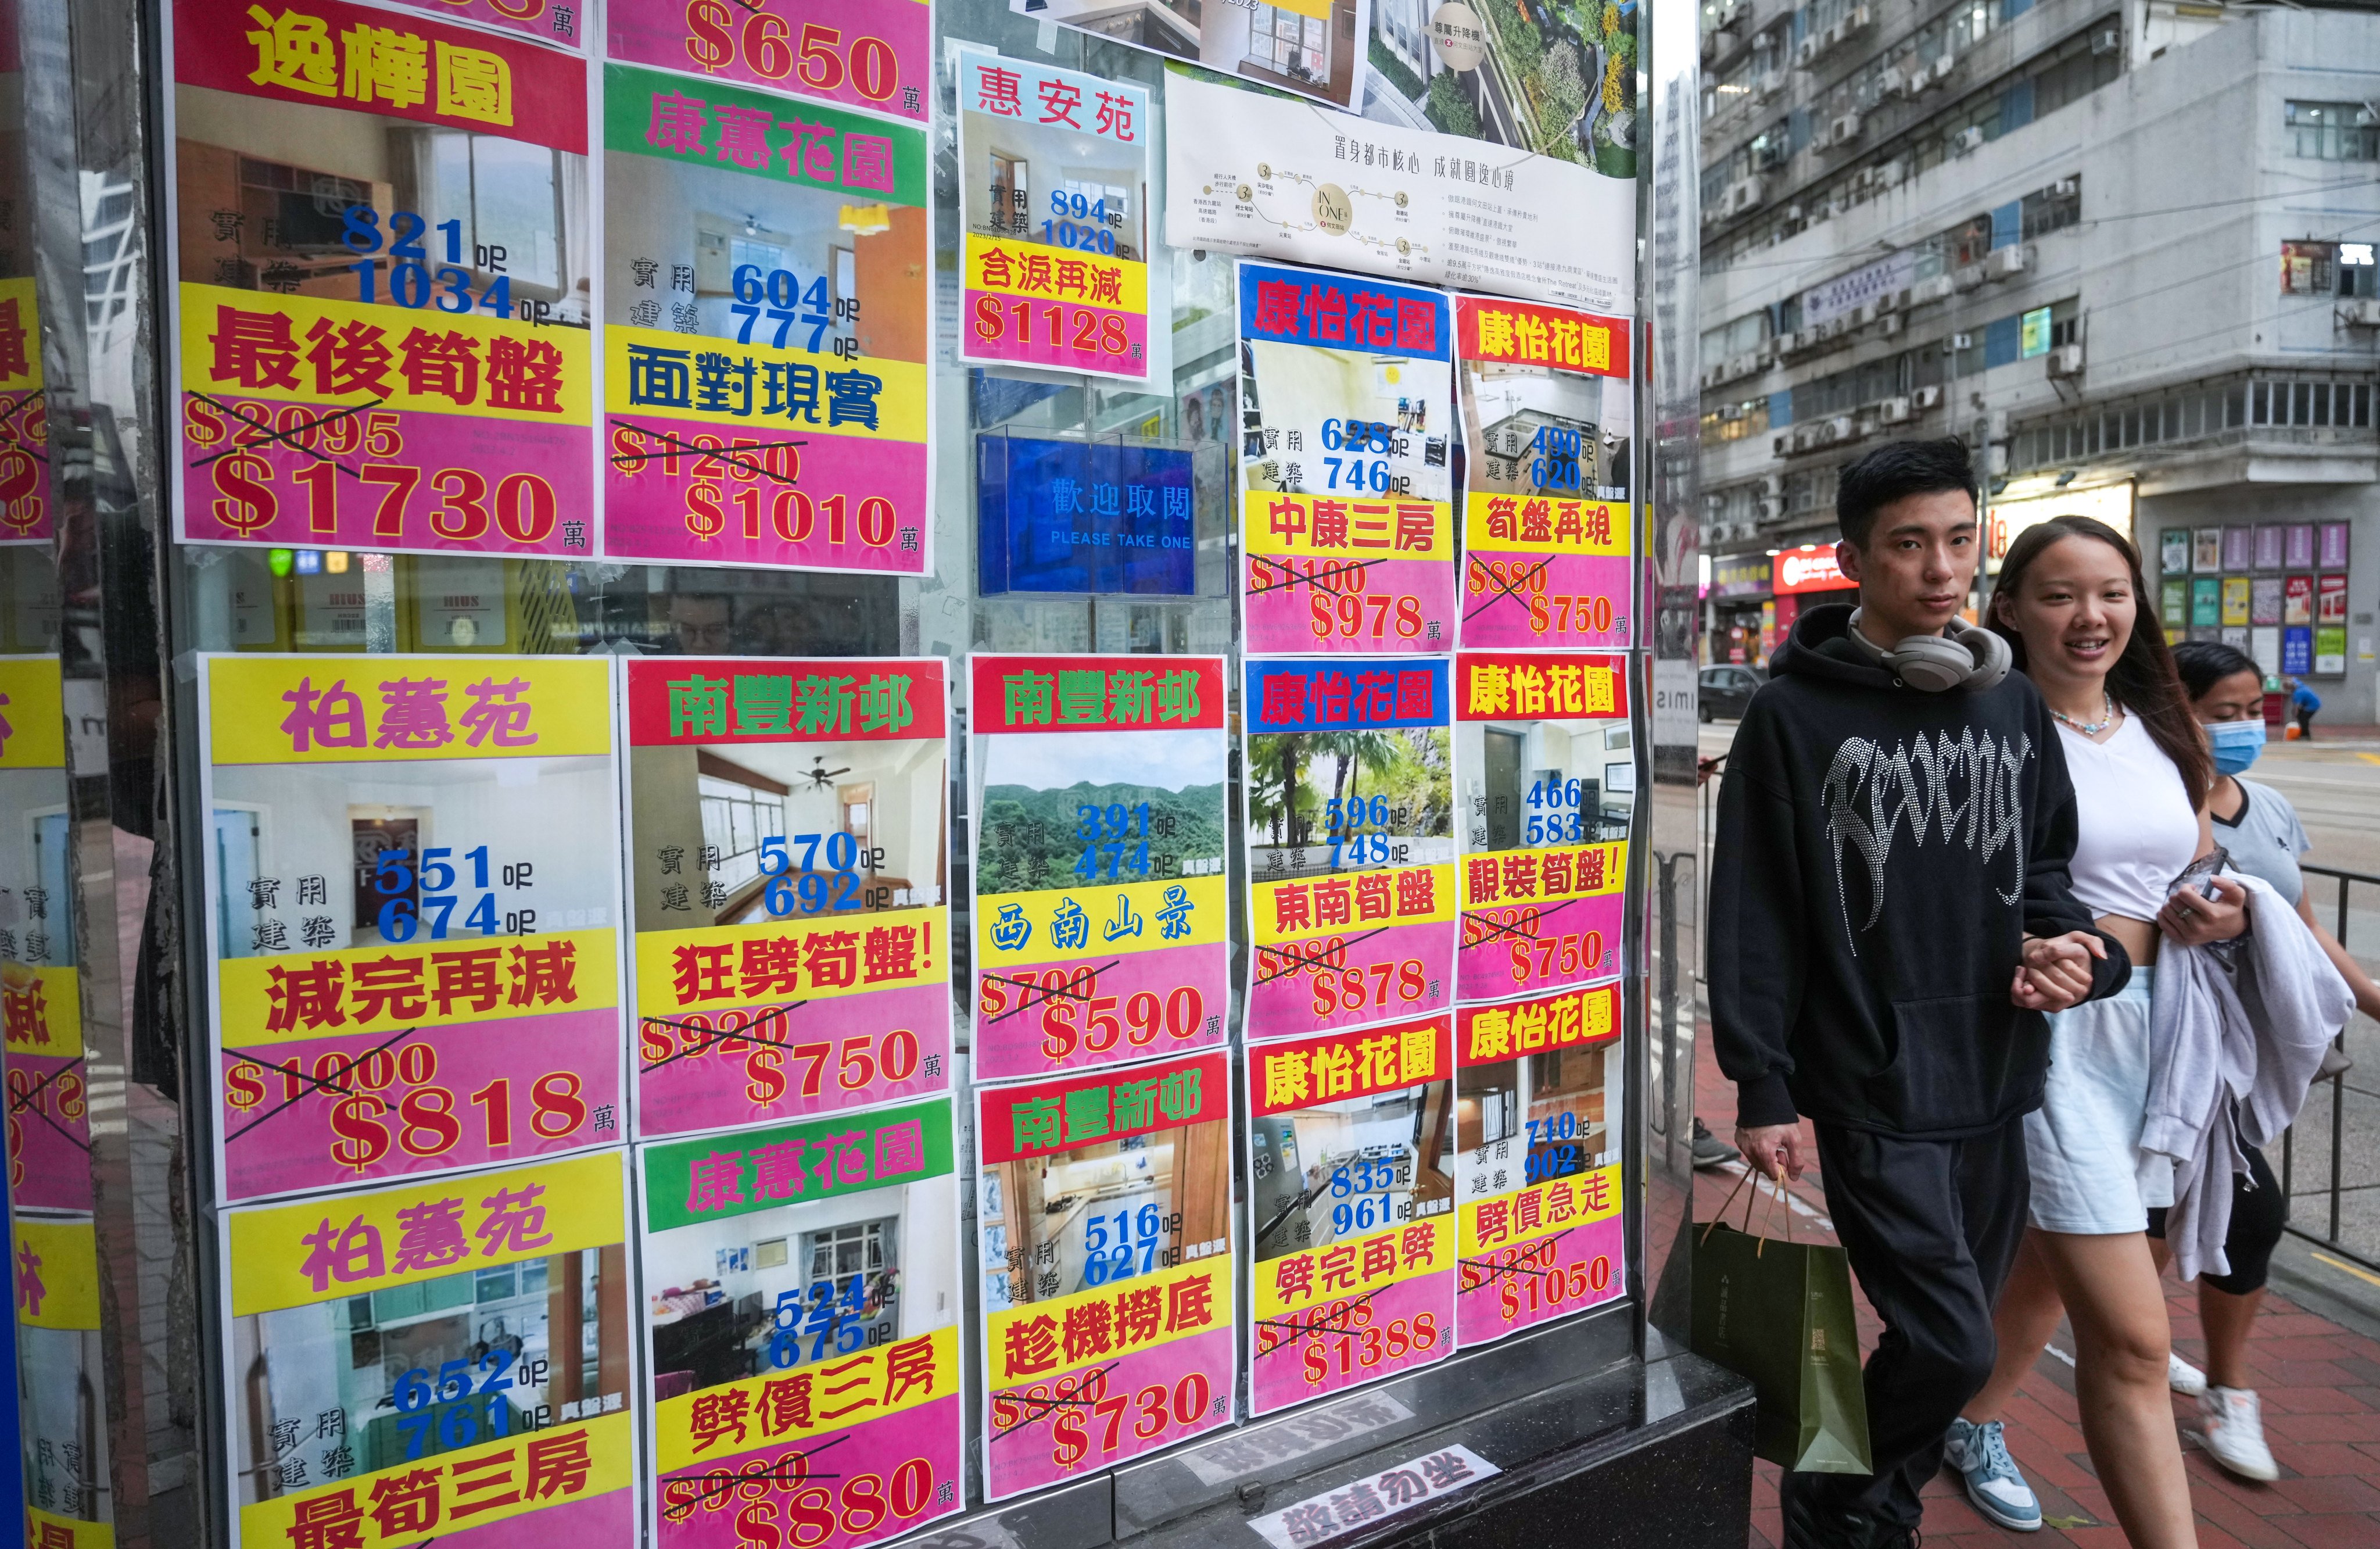 The government has faced mounting pressure from developers and the business sector to ease property market cooling measures amid an ongoing decline in transactions and a series of failed land purchase bids. Photo: Sam Tsang